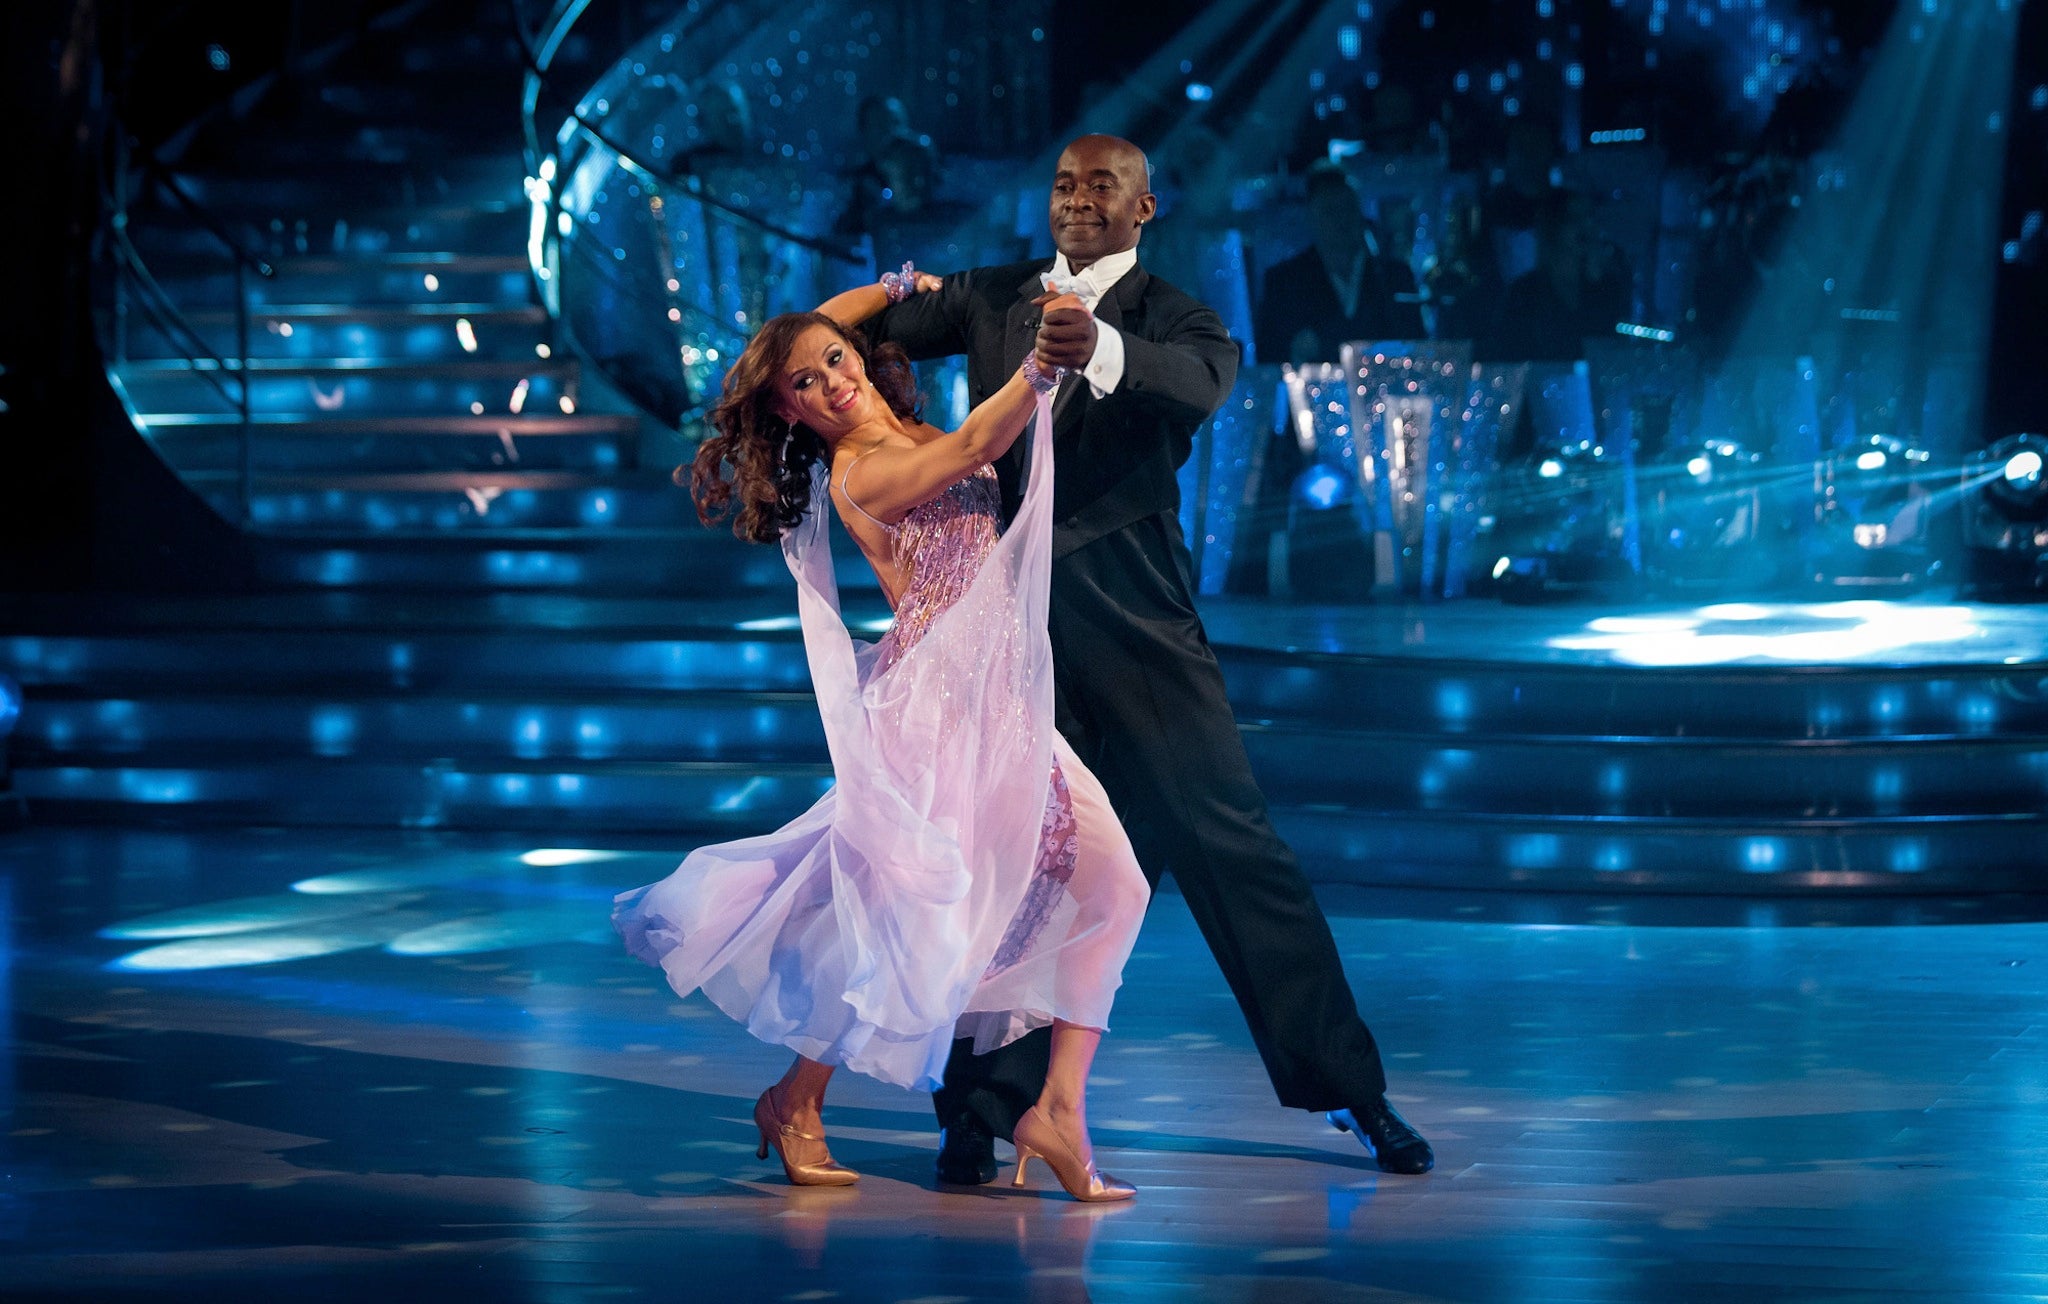 Actor Patrick Robinson and his dance partner Anya Garnis have left the competition